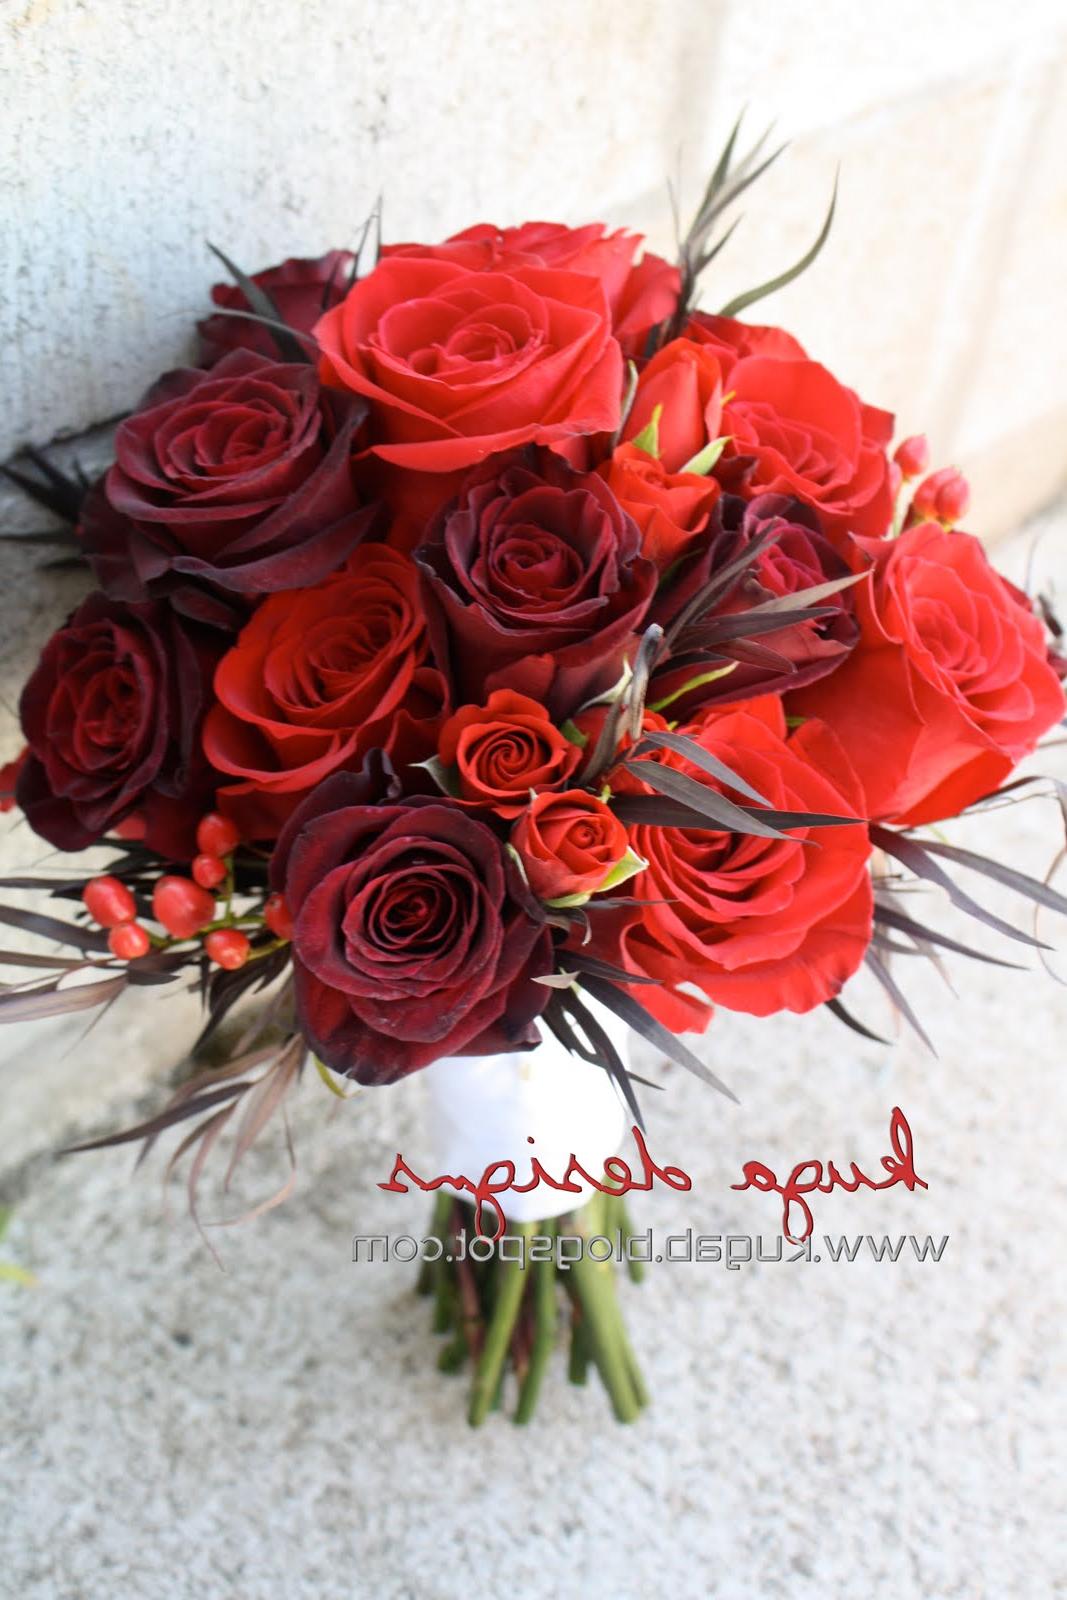 red and black weddings